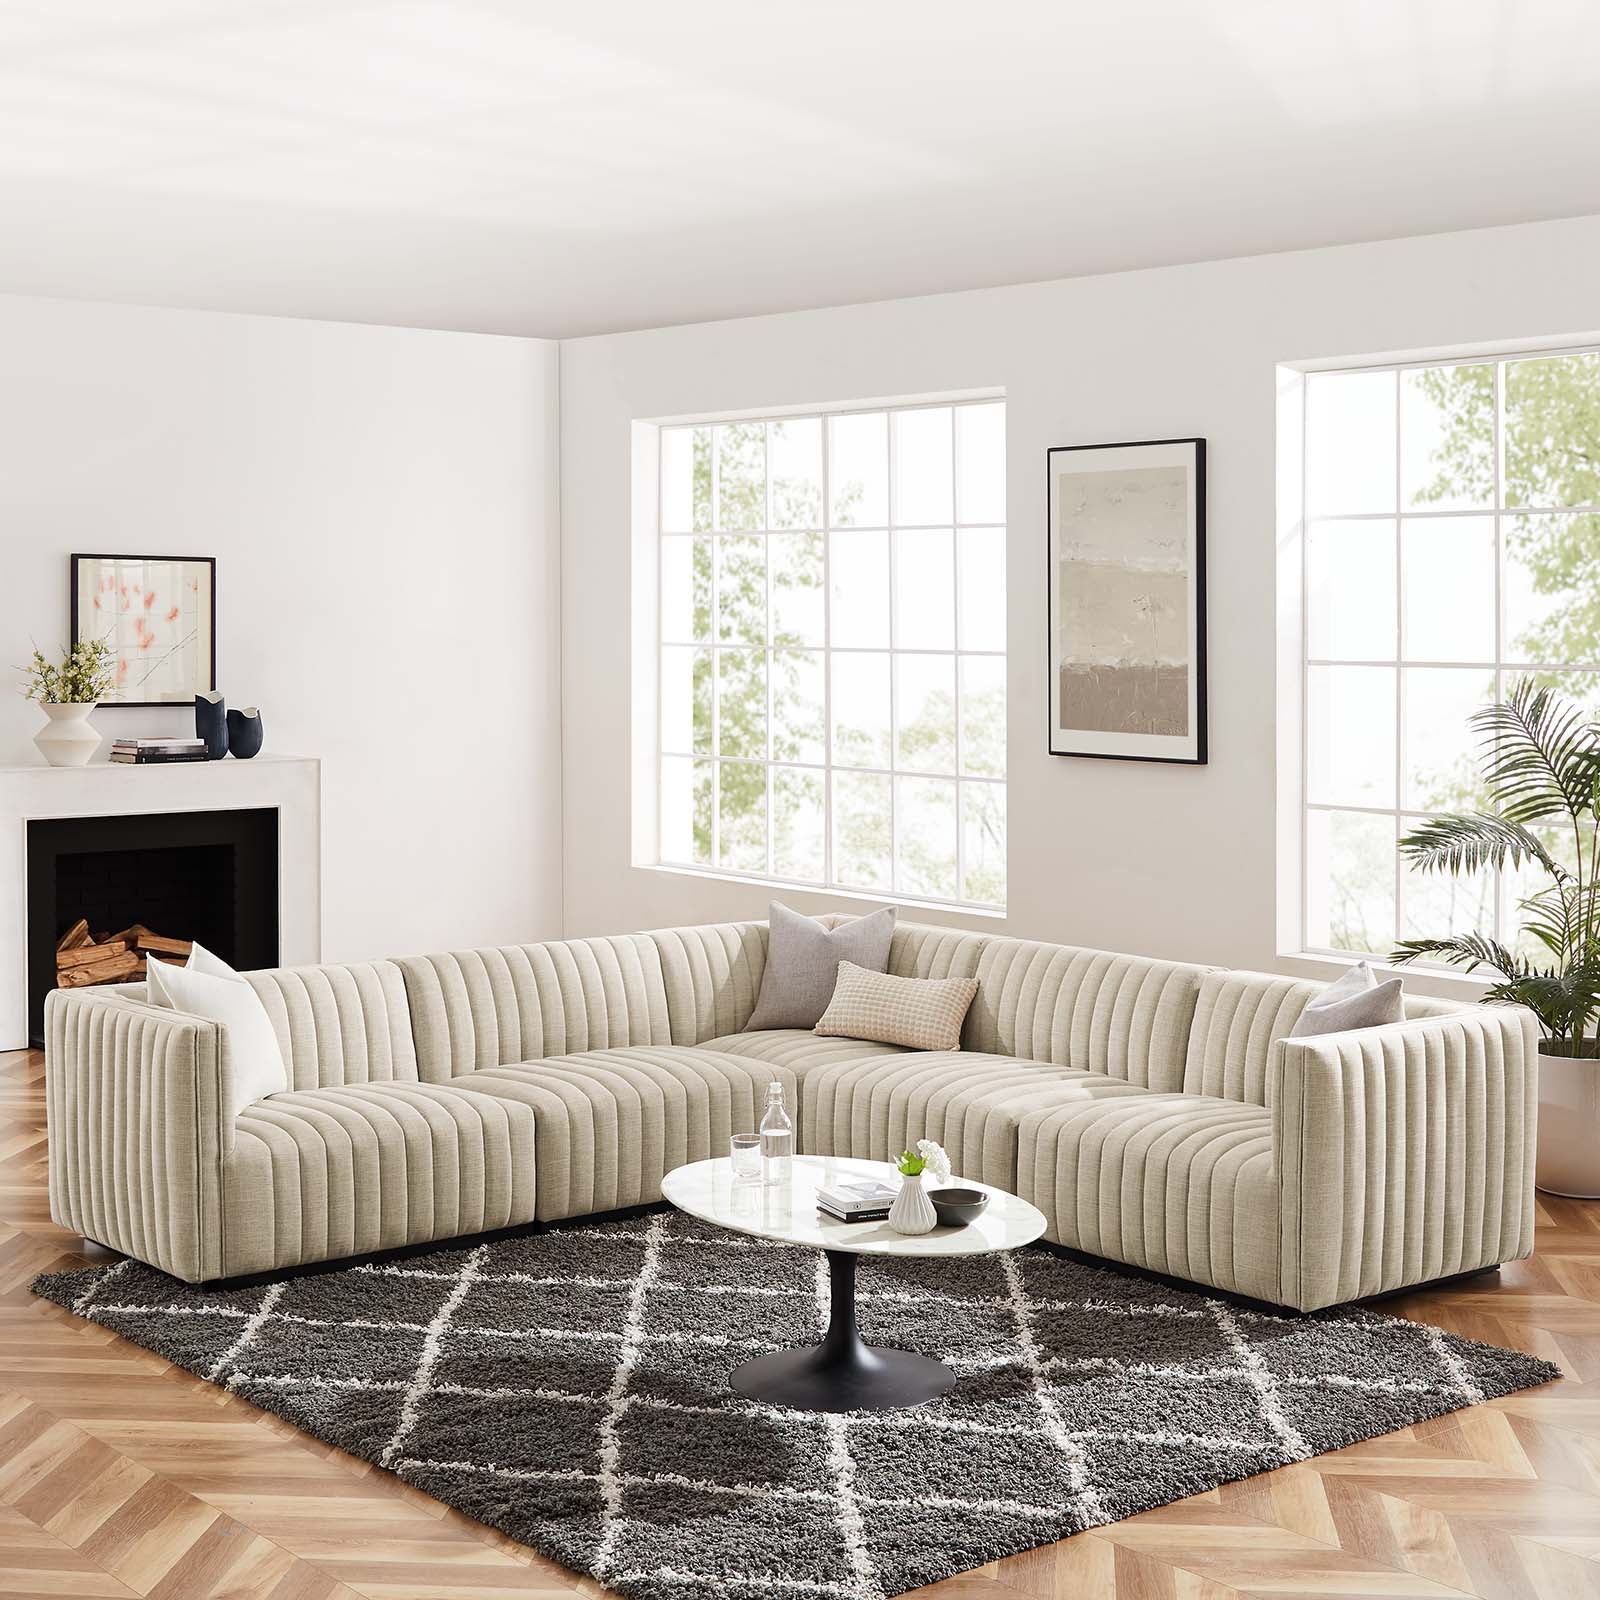 Modway Sectional Sofas - Conjure Channel Tufted Upholstered Fabric 5-Piece L-Shaped Sectional Black Beige